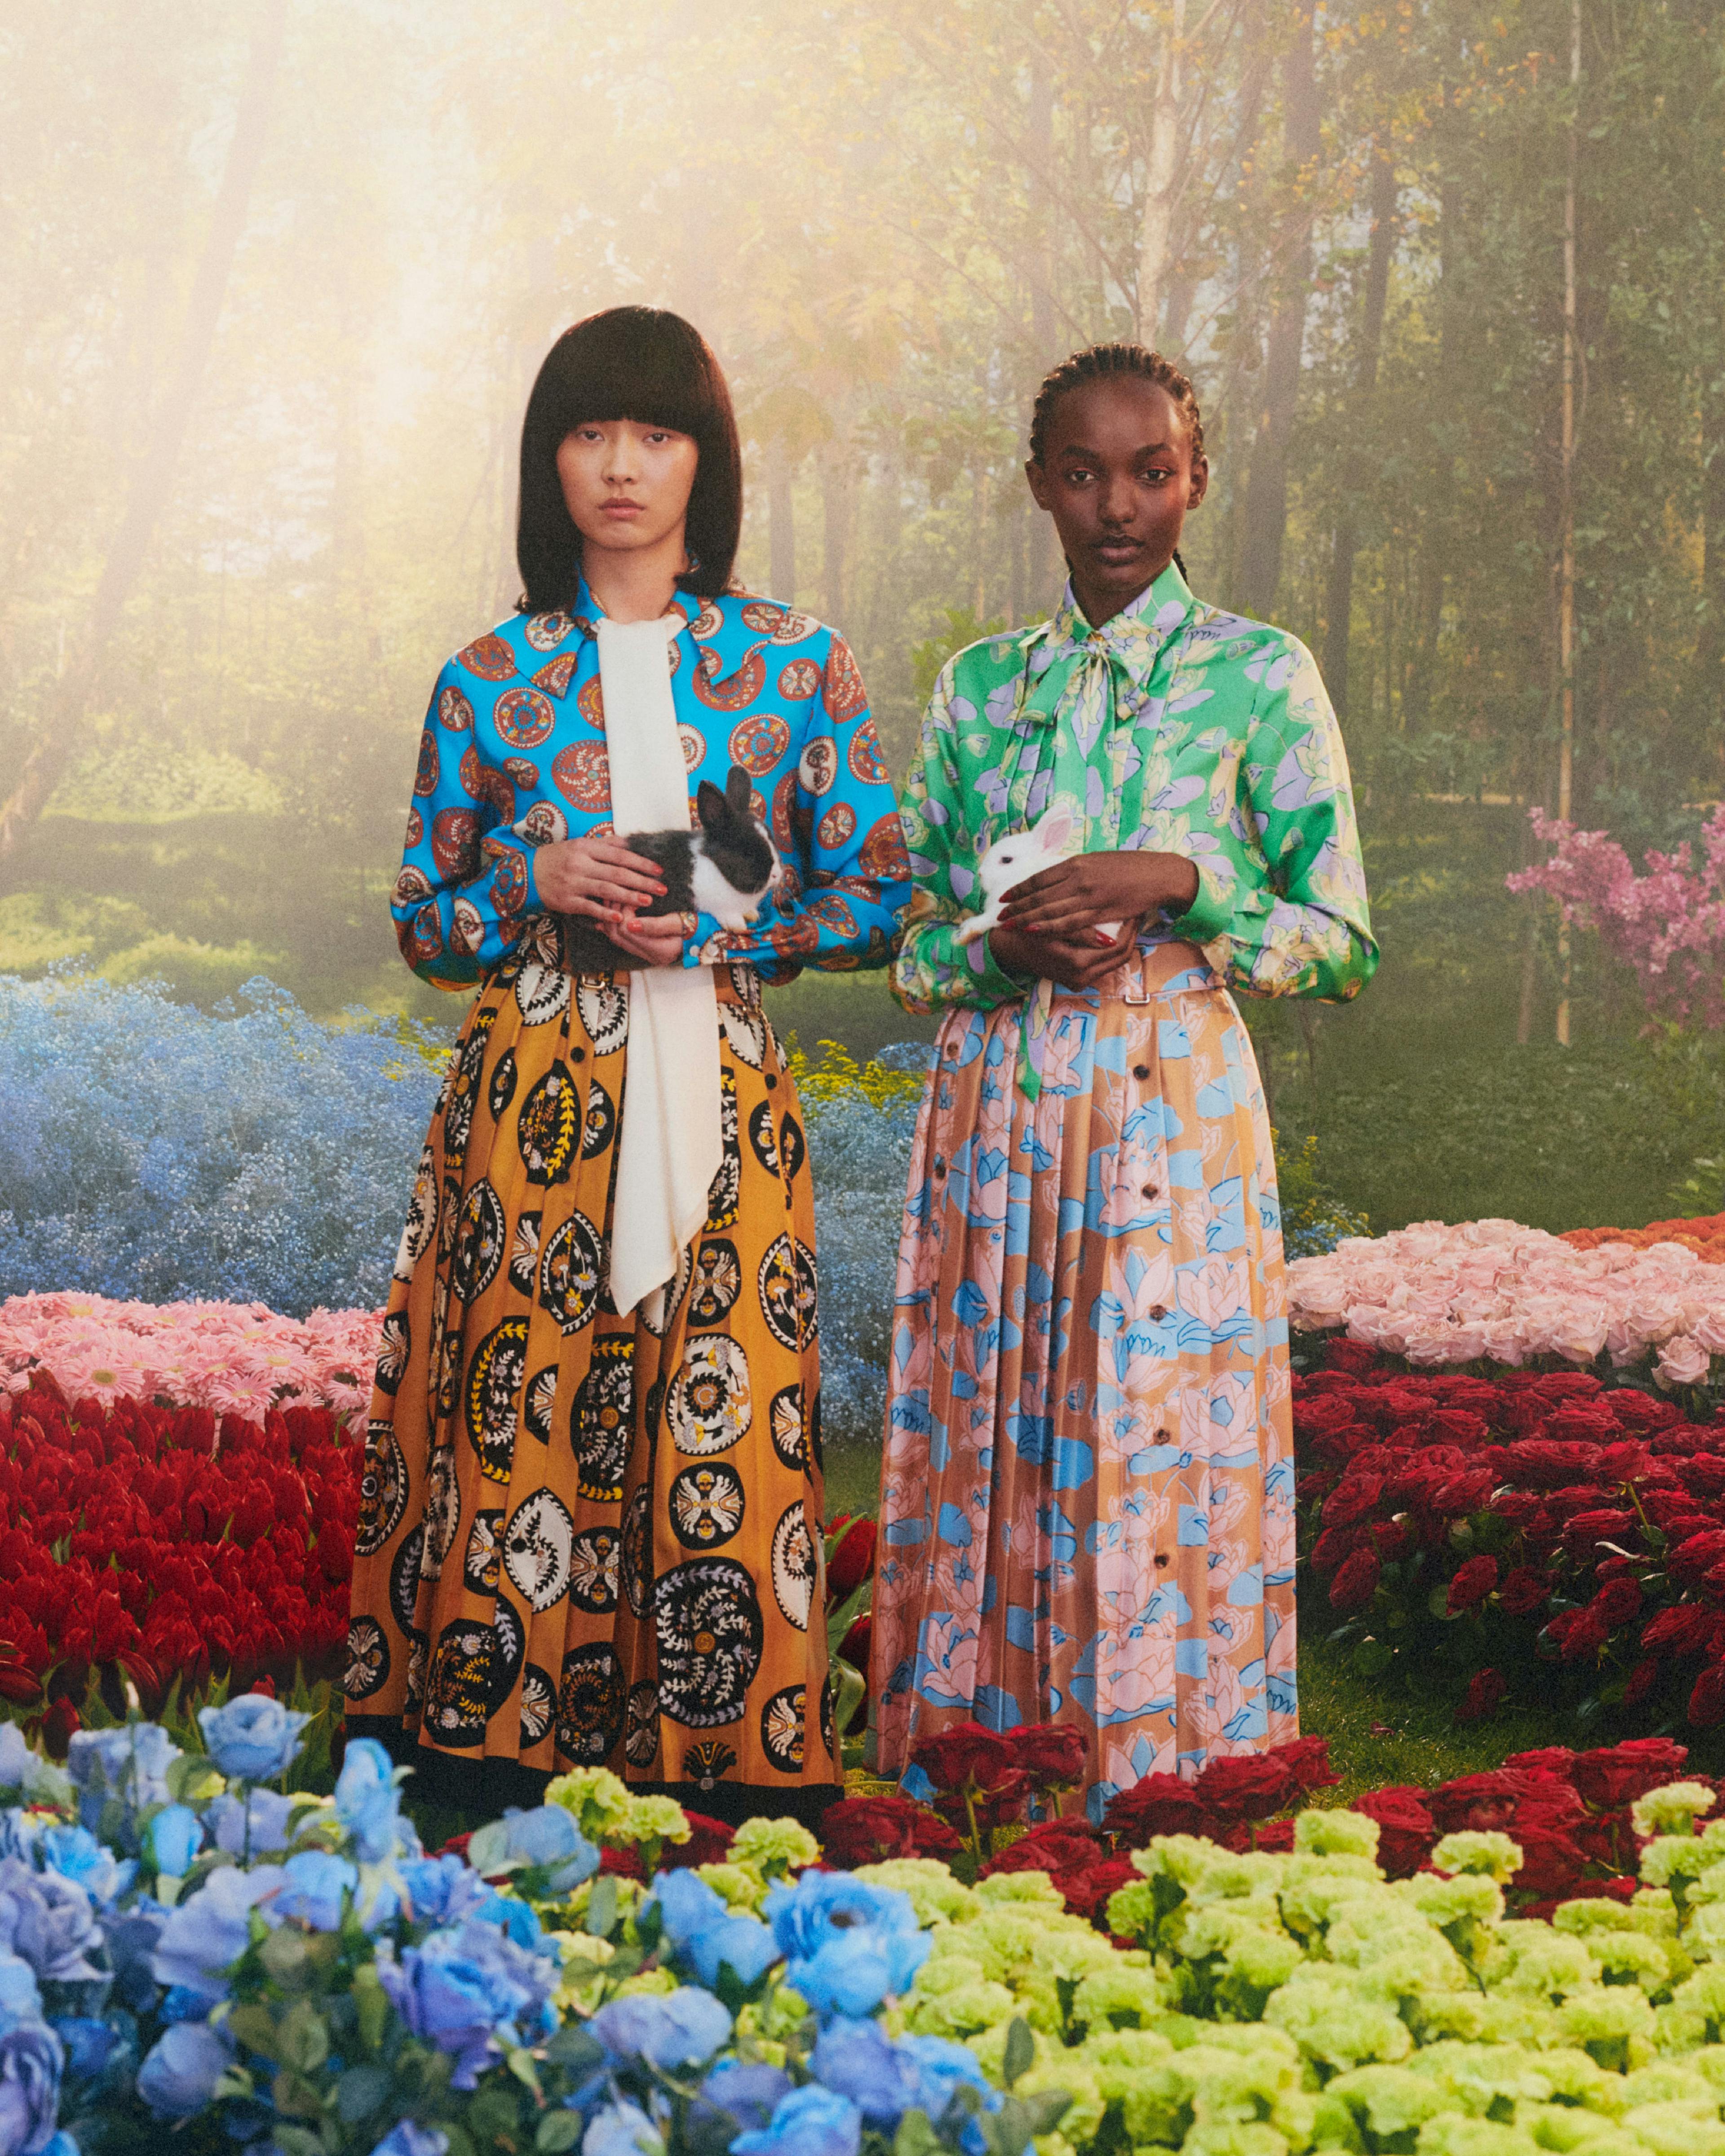 Two models standing in a colorful field holding two bunnies.